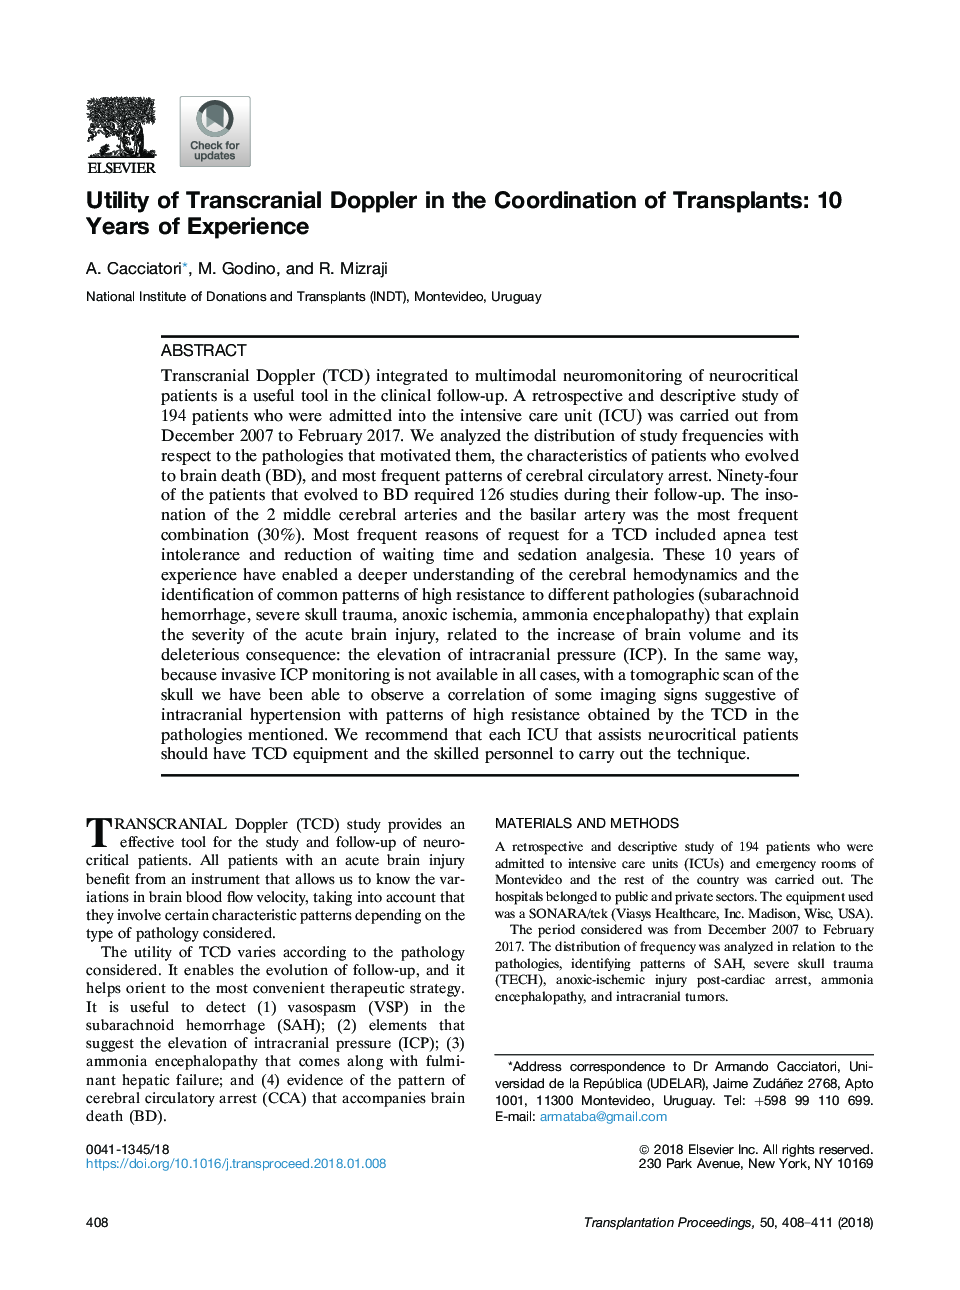 Utility of Transcranial Doppler in the Coordination of Transplants: 10 Years of Experience